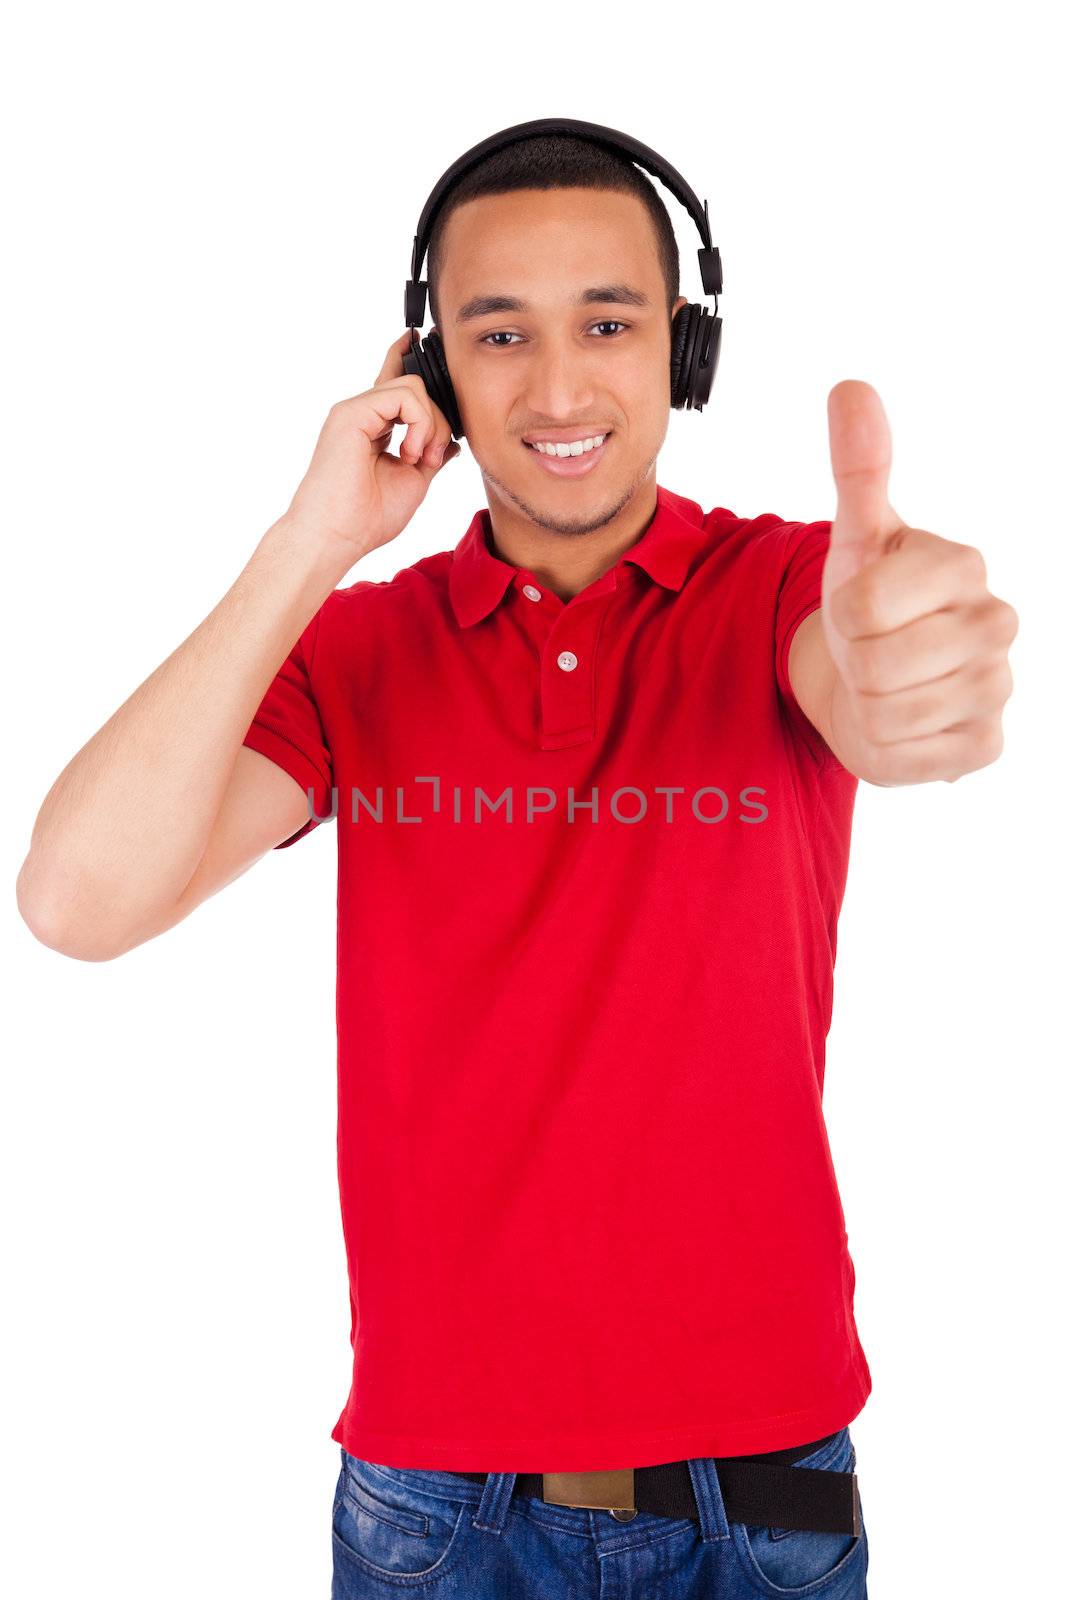 Black man having fun listening to music - isolated over a white background